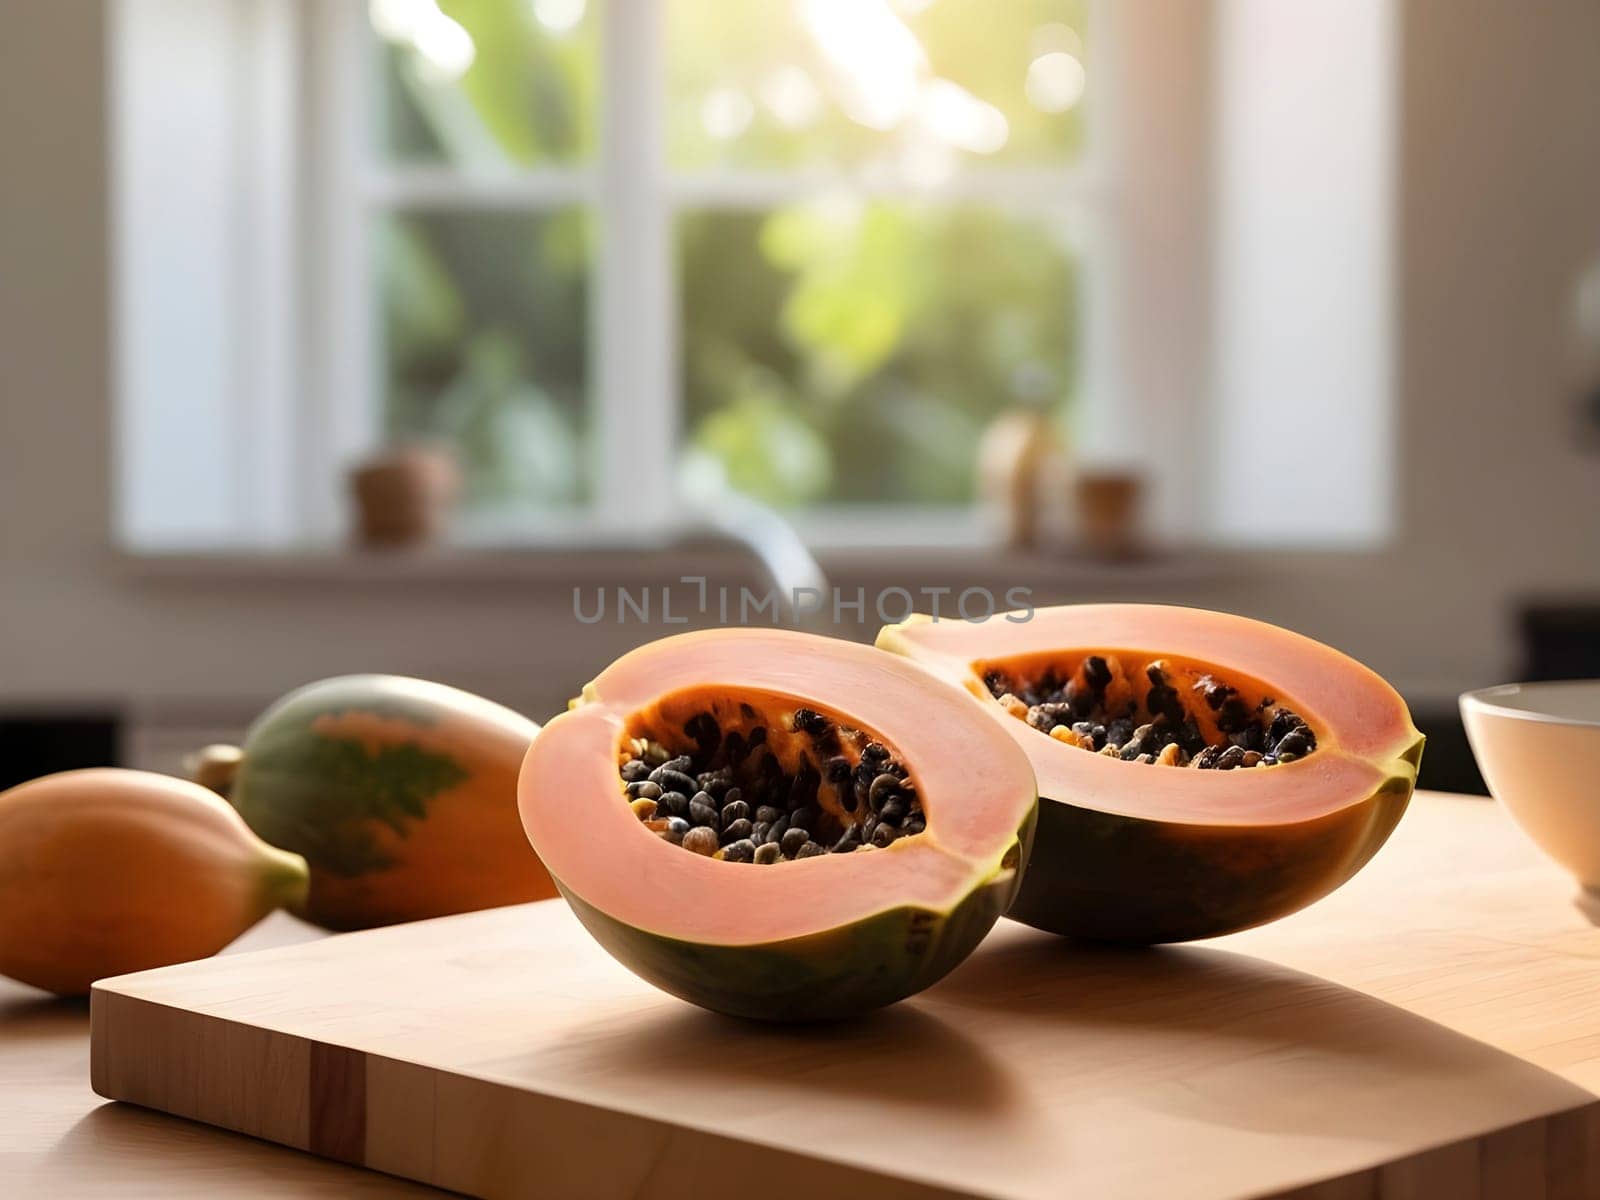 Tropical Tranquility: Afternoon Glow with Papaya on Wooden Cutting Board by mailos